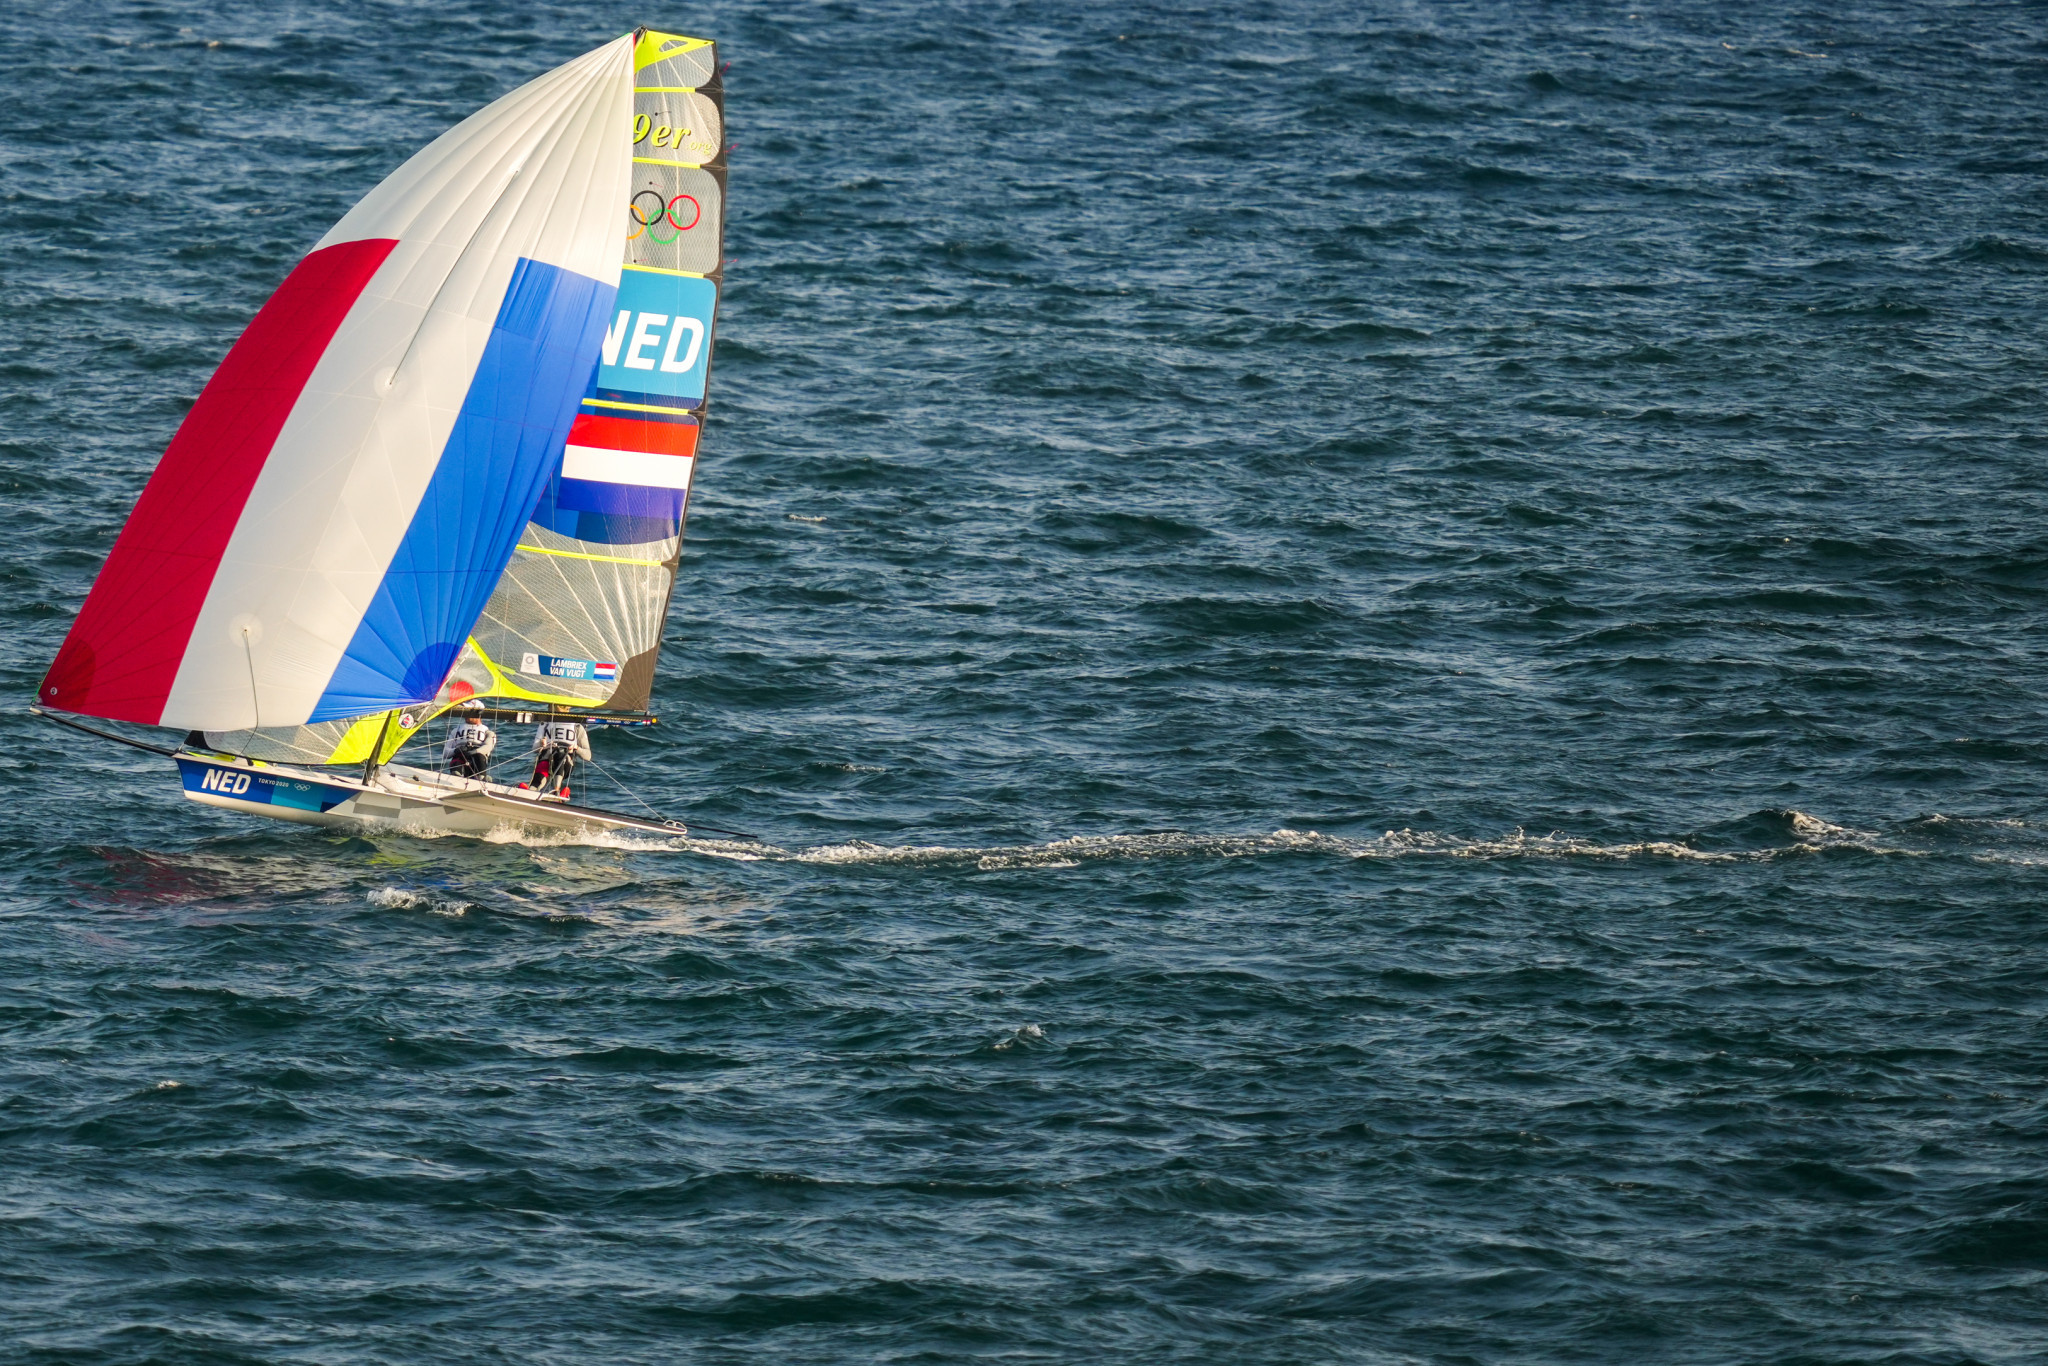 The Netherlands enjoyed success at the 49er, 49erFX and Nacra 17 World Championships ©Getty Images